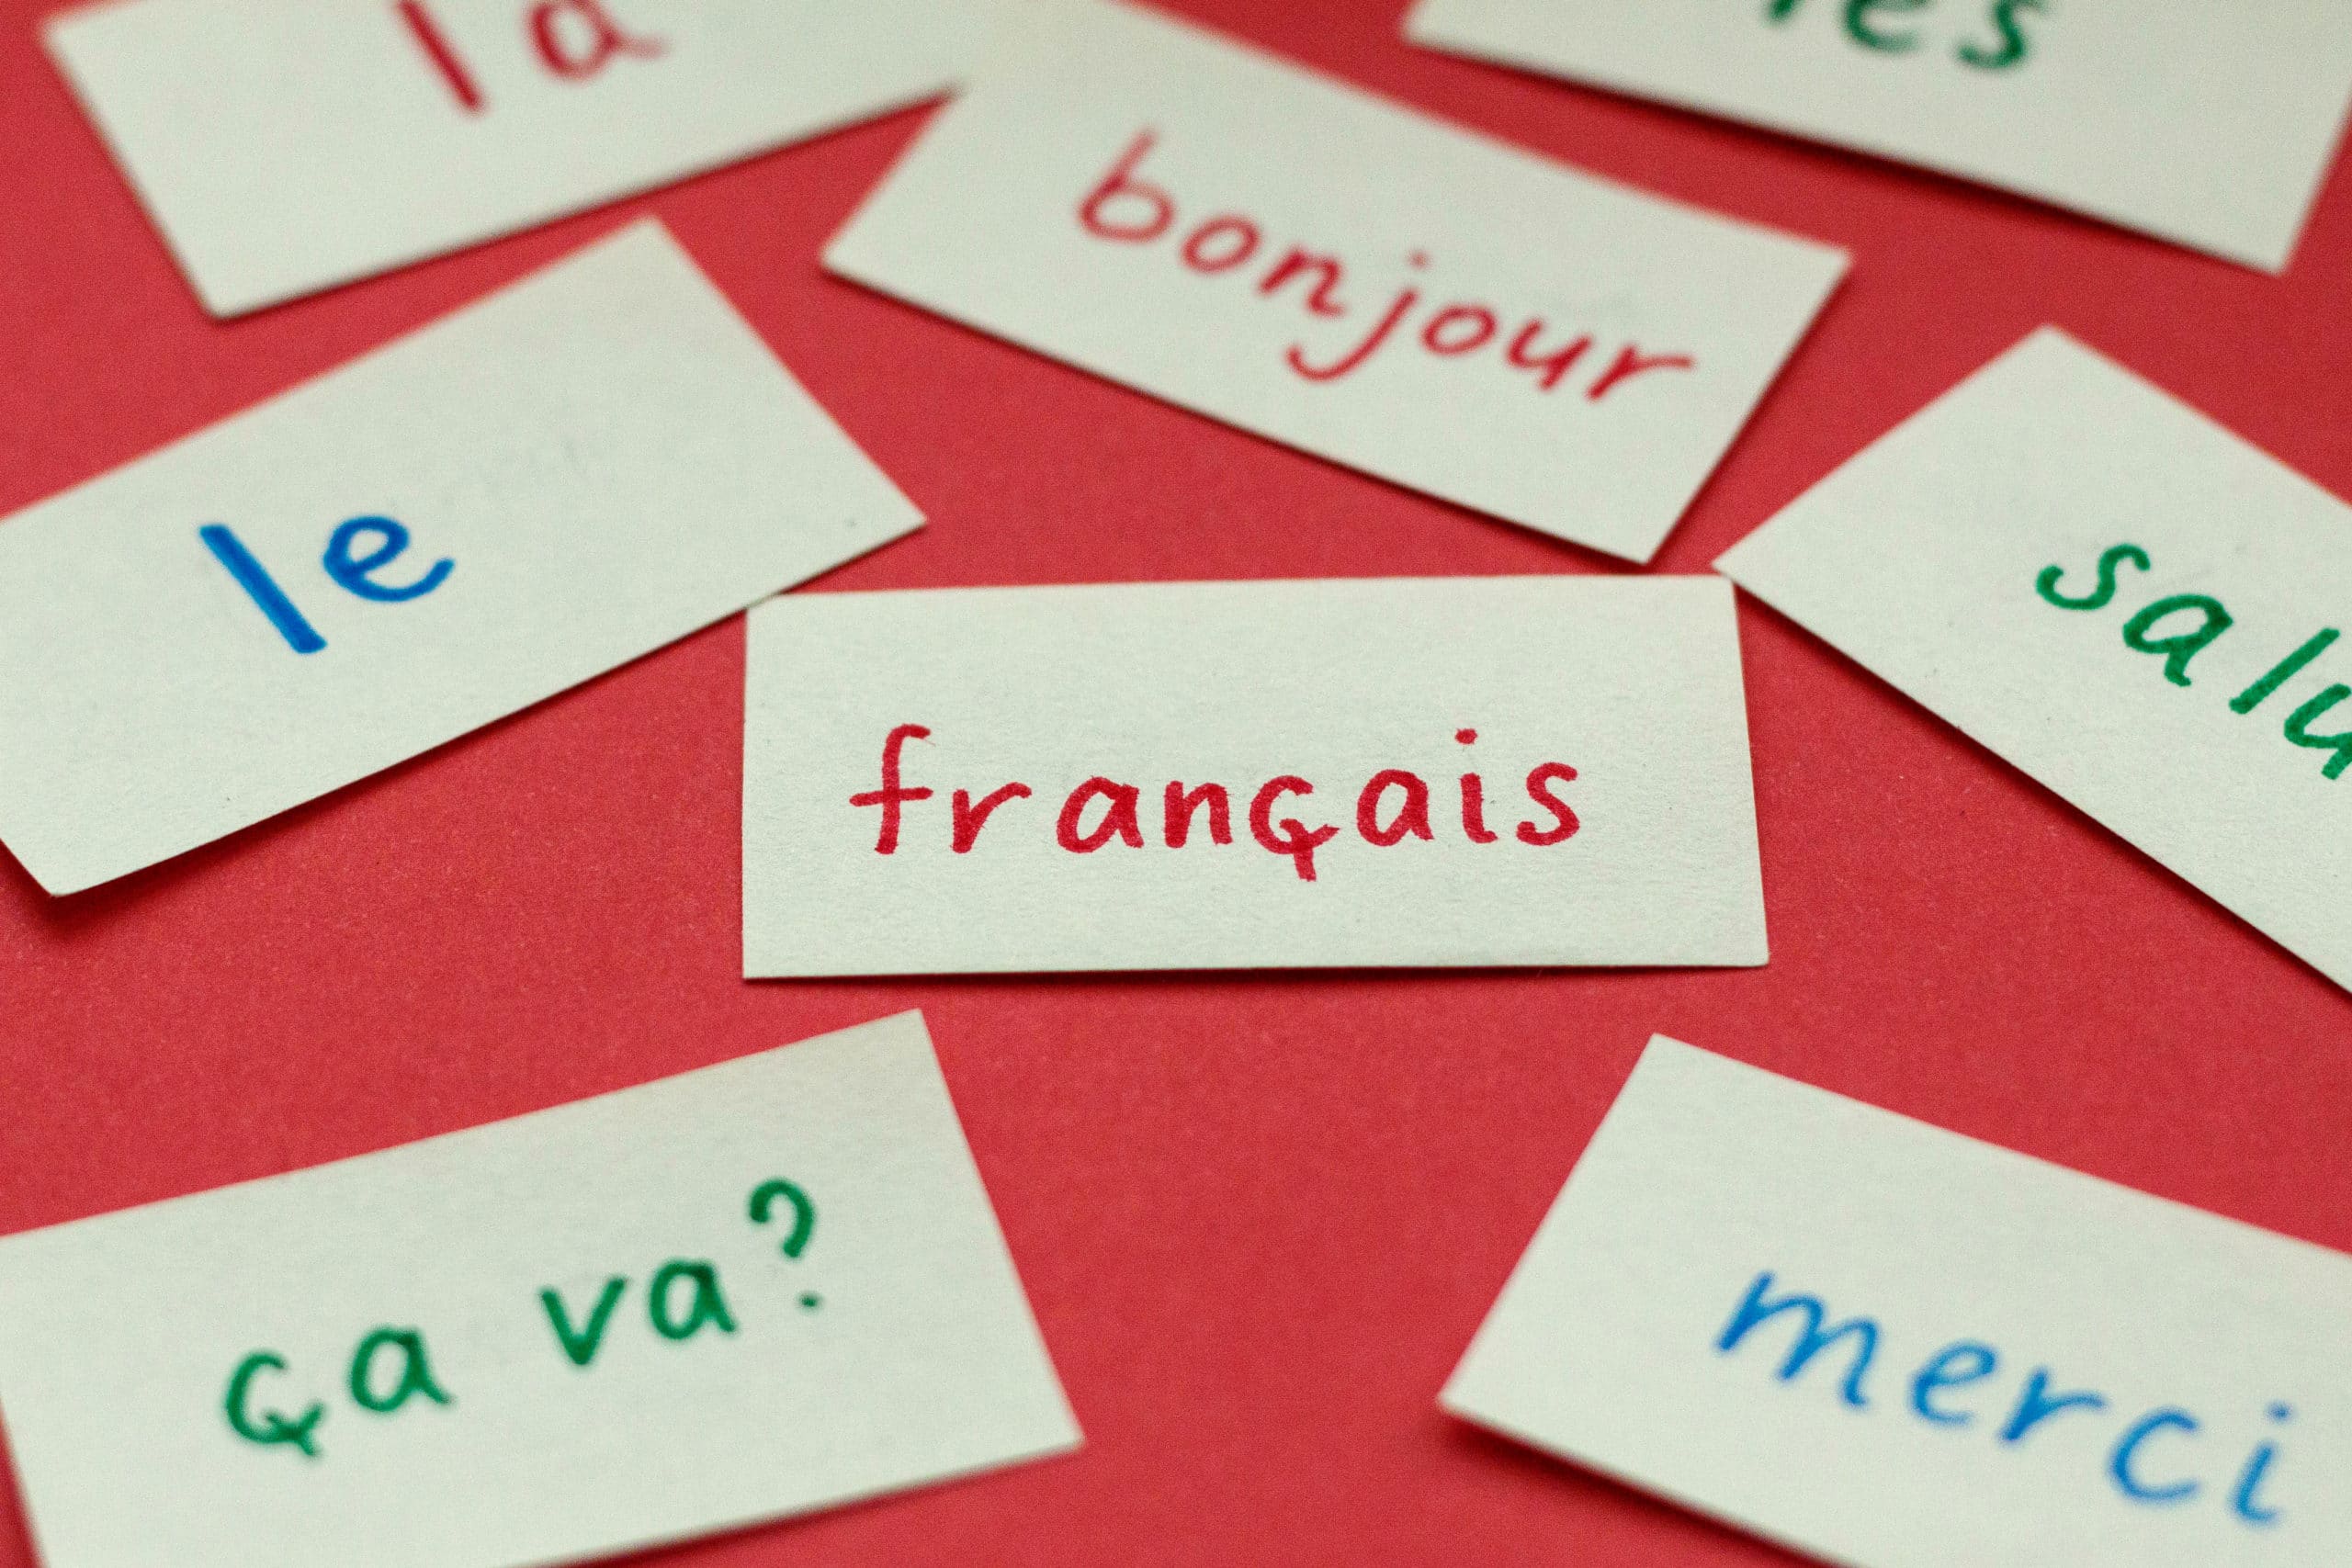 15 Beginning French Phrases to Learn